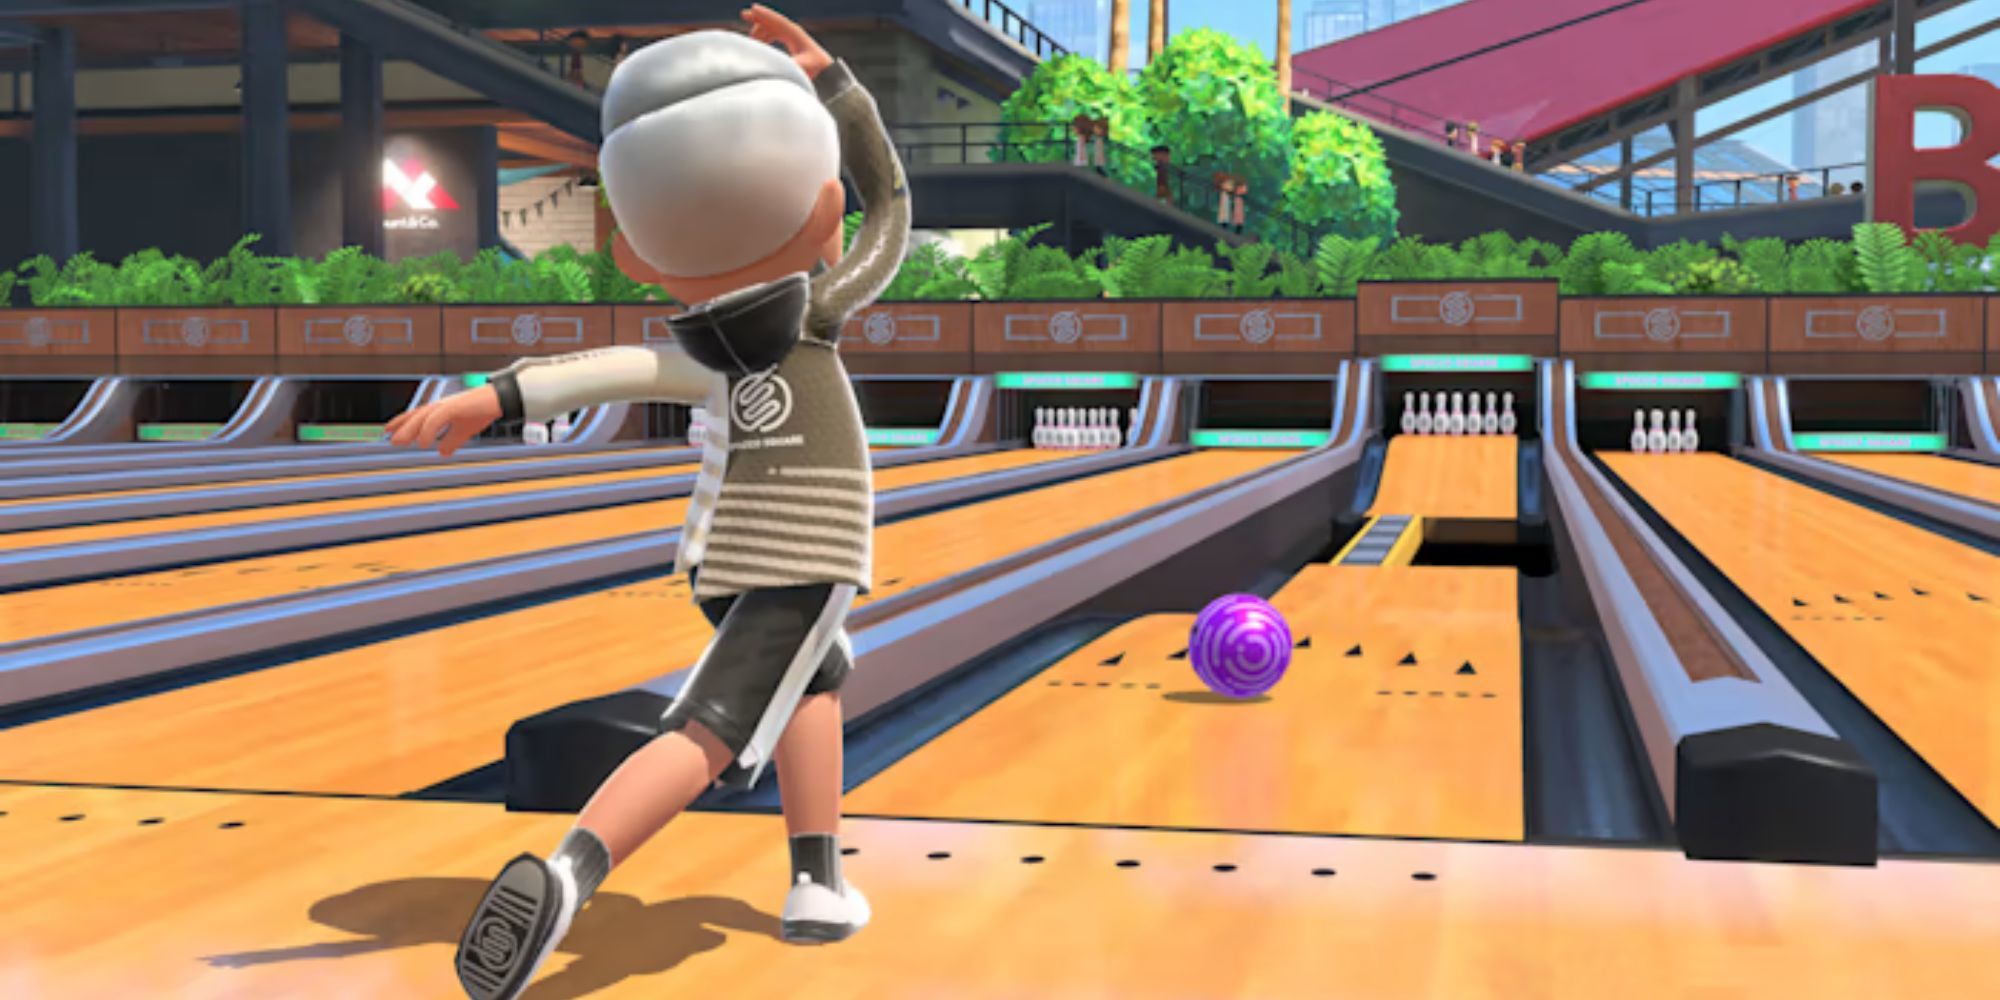 Switch Games With Motion Controls - Nintendo Switch Sports - A Person Throwing A Bowling Ball Down A Lane